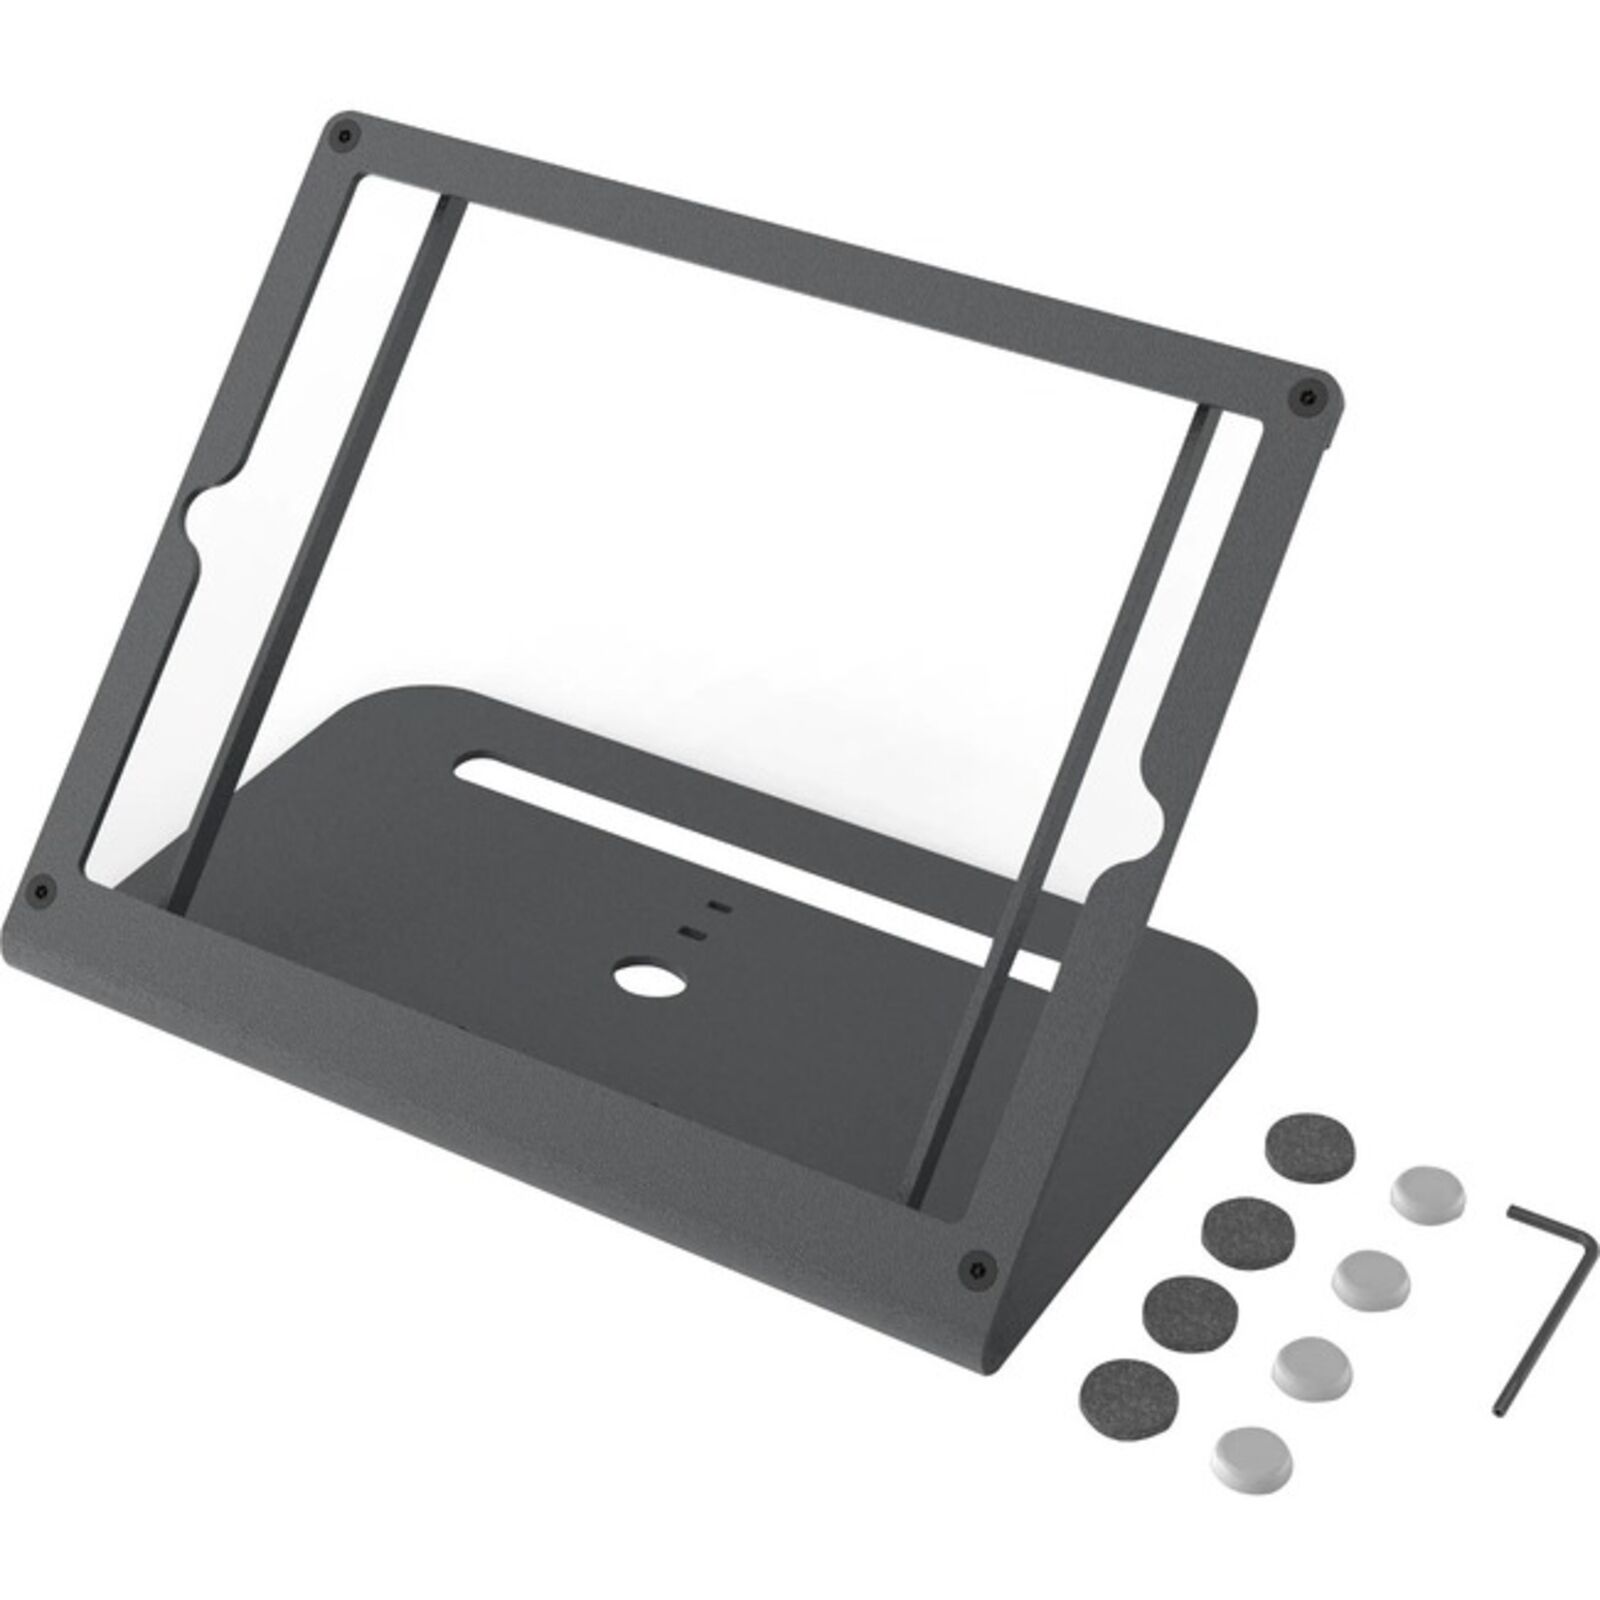 Heckler Design - H600X-BG - WindFall Stand Prime for iPad - Up to 10.2 Screen